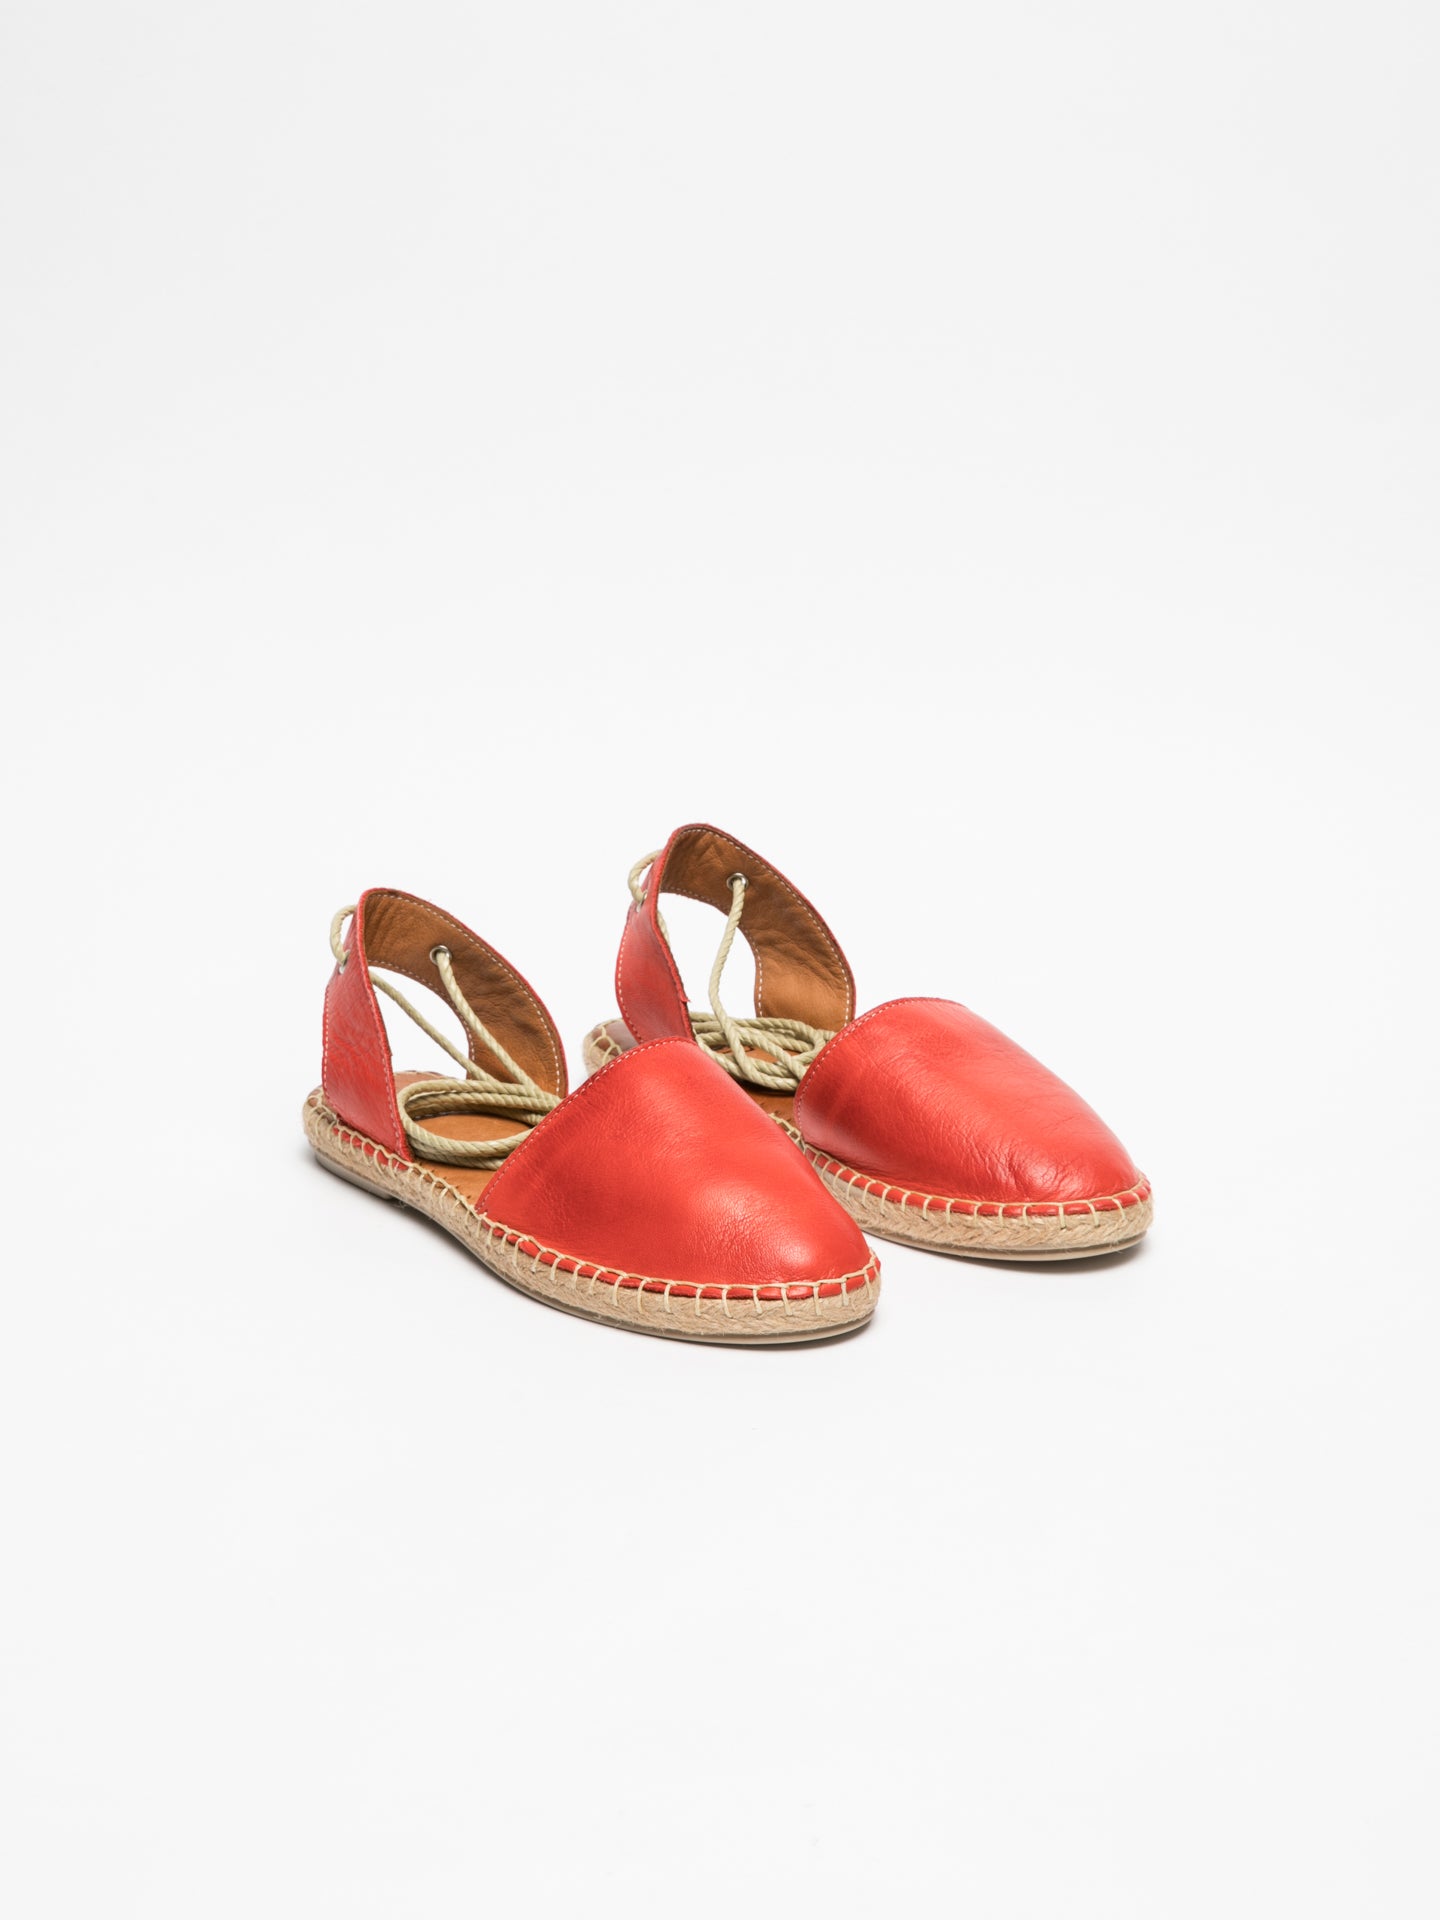 Foreva Red Lace-up Espadrilles